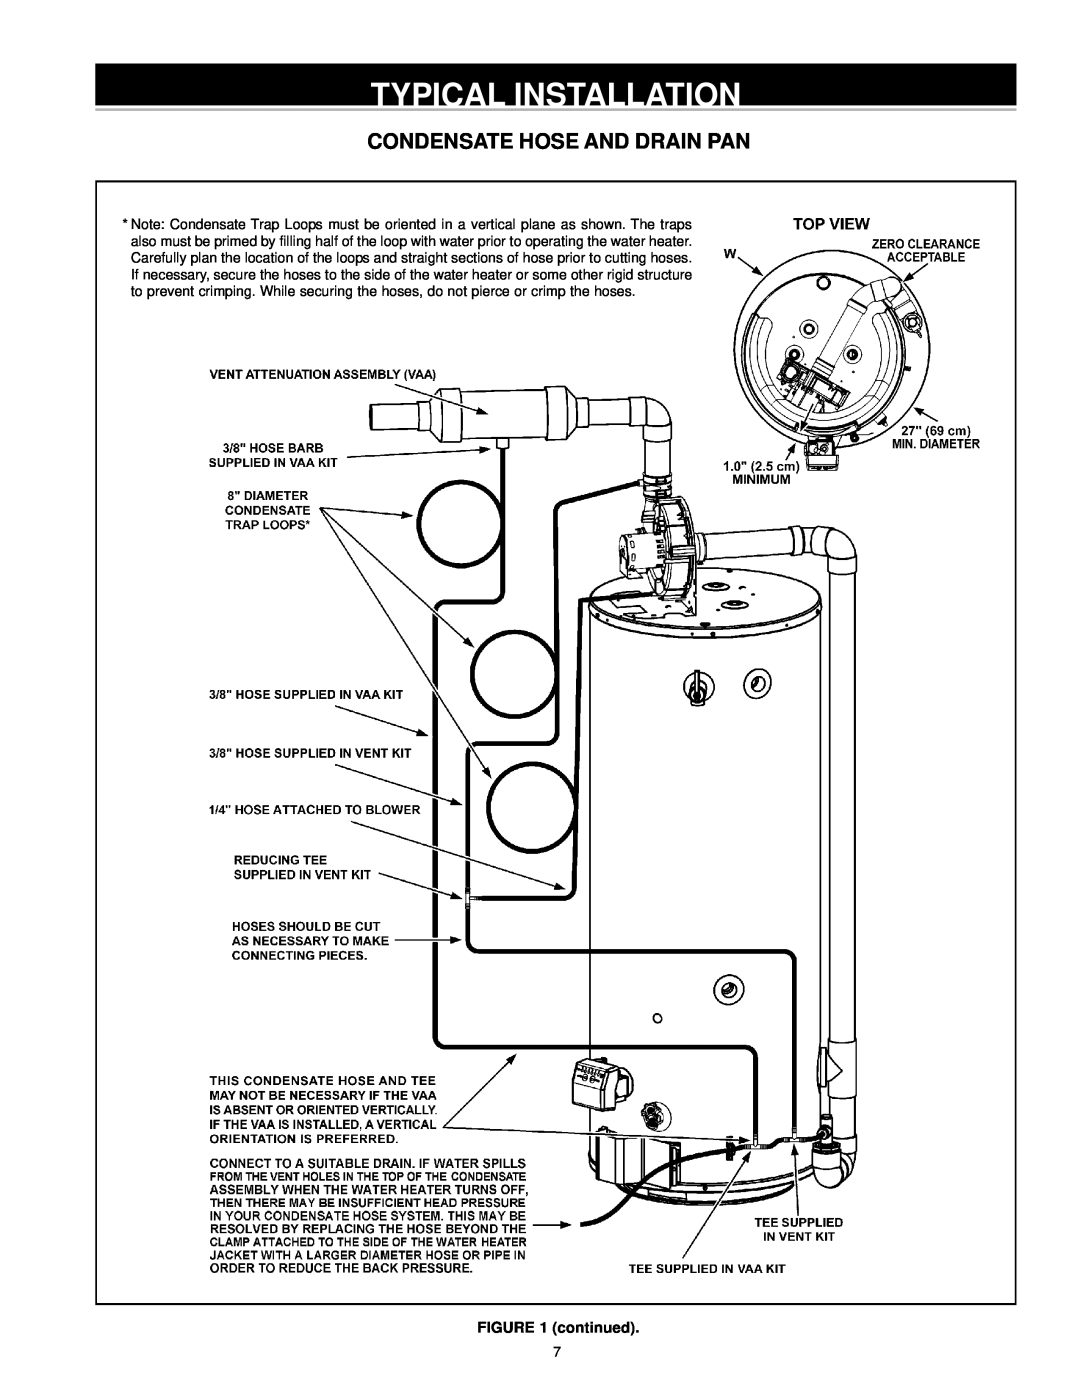 A.O. Smith ARGSS02708 instruction manual Condensate Hose And Drain Pan, Typical Installation, continued 